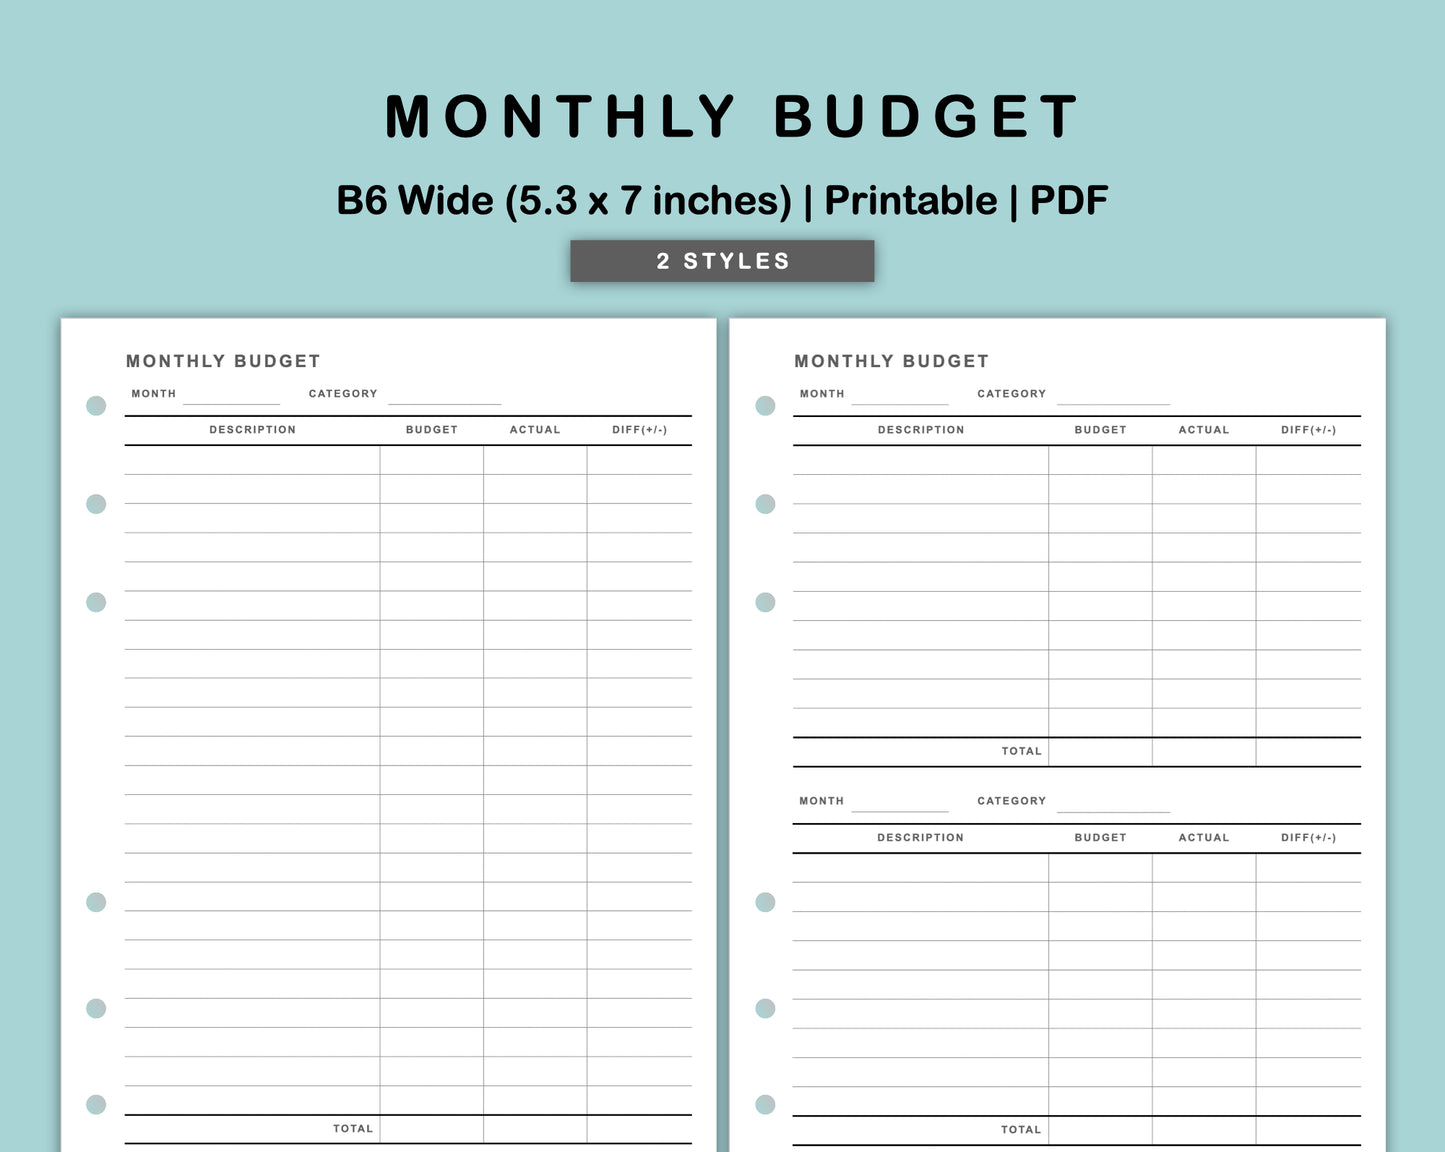 B6 Wide Inserts - Monthly Budget